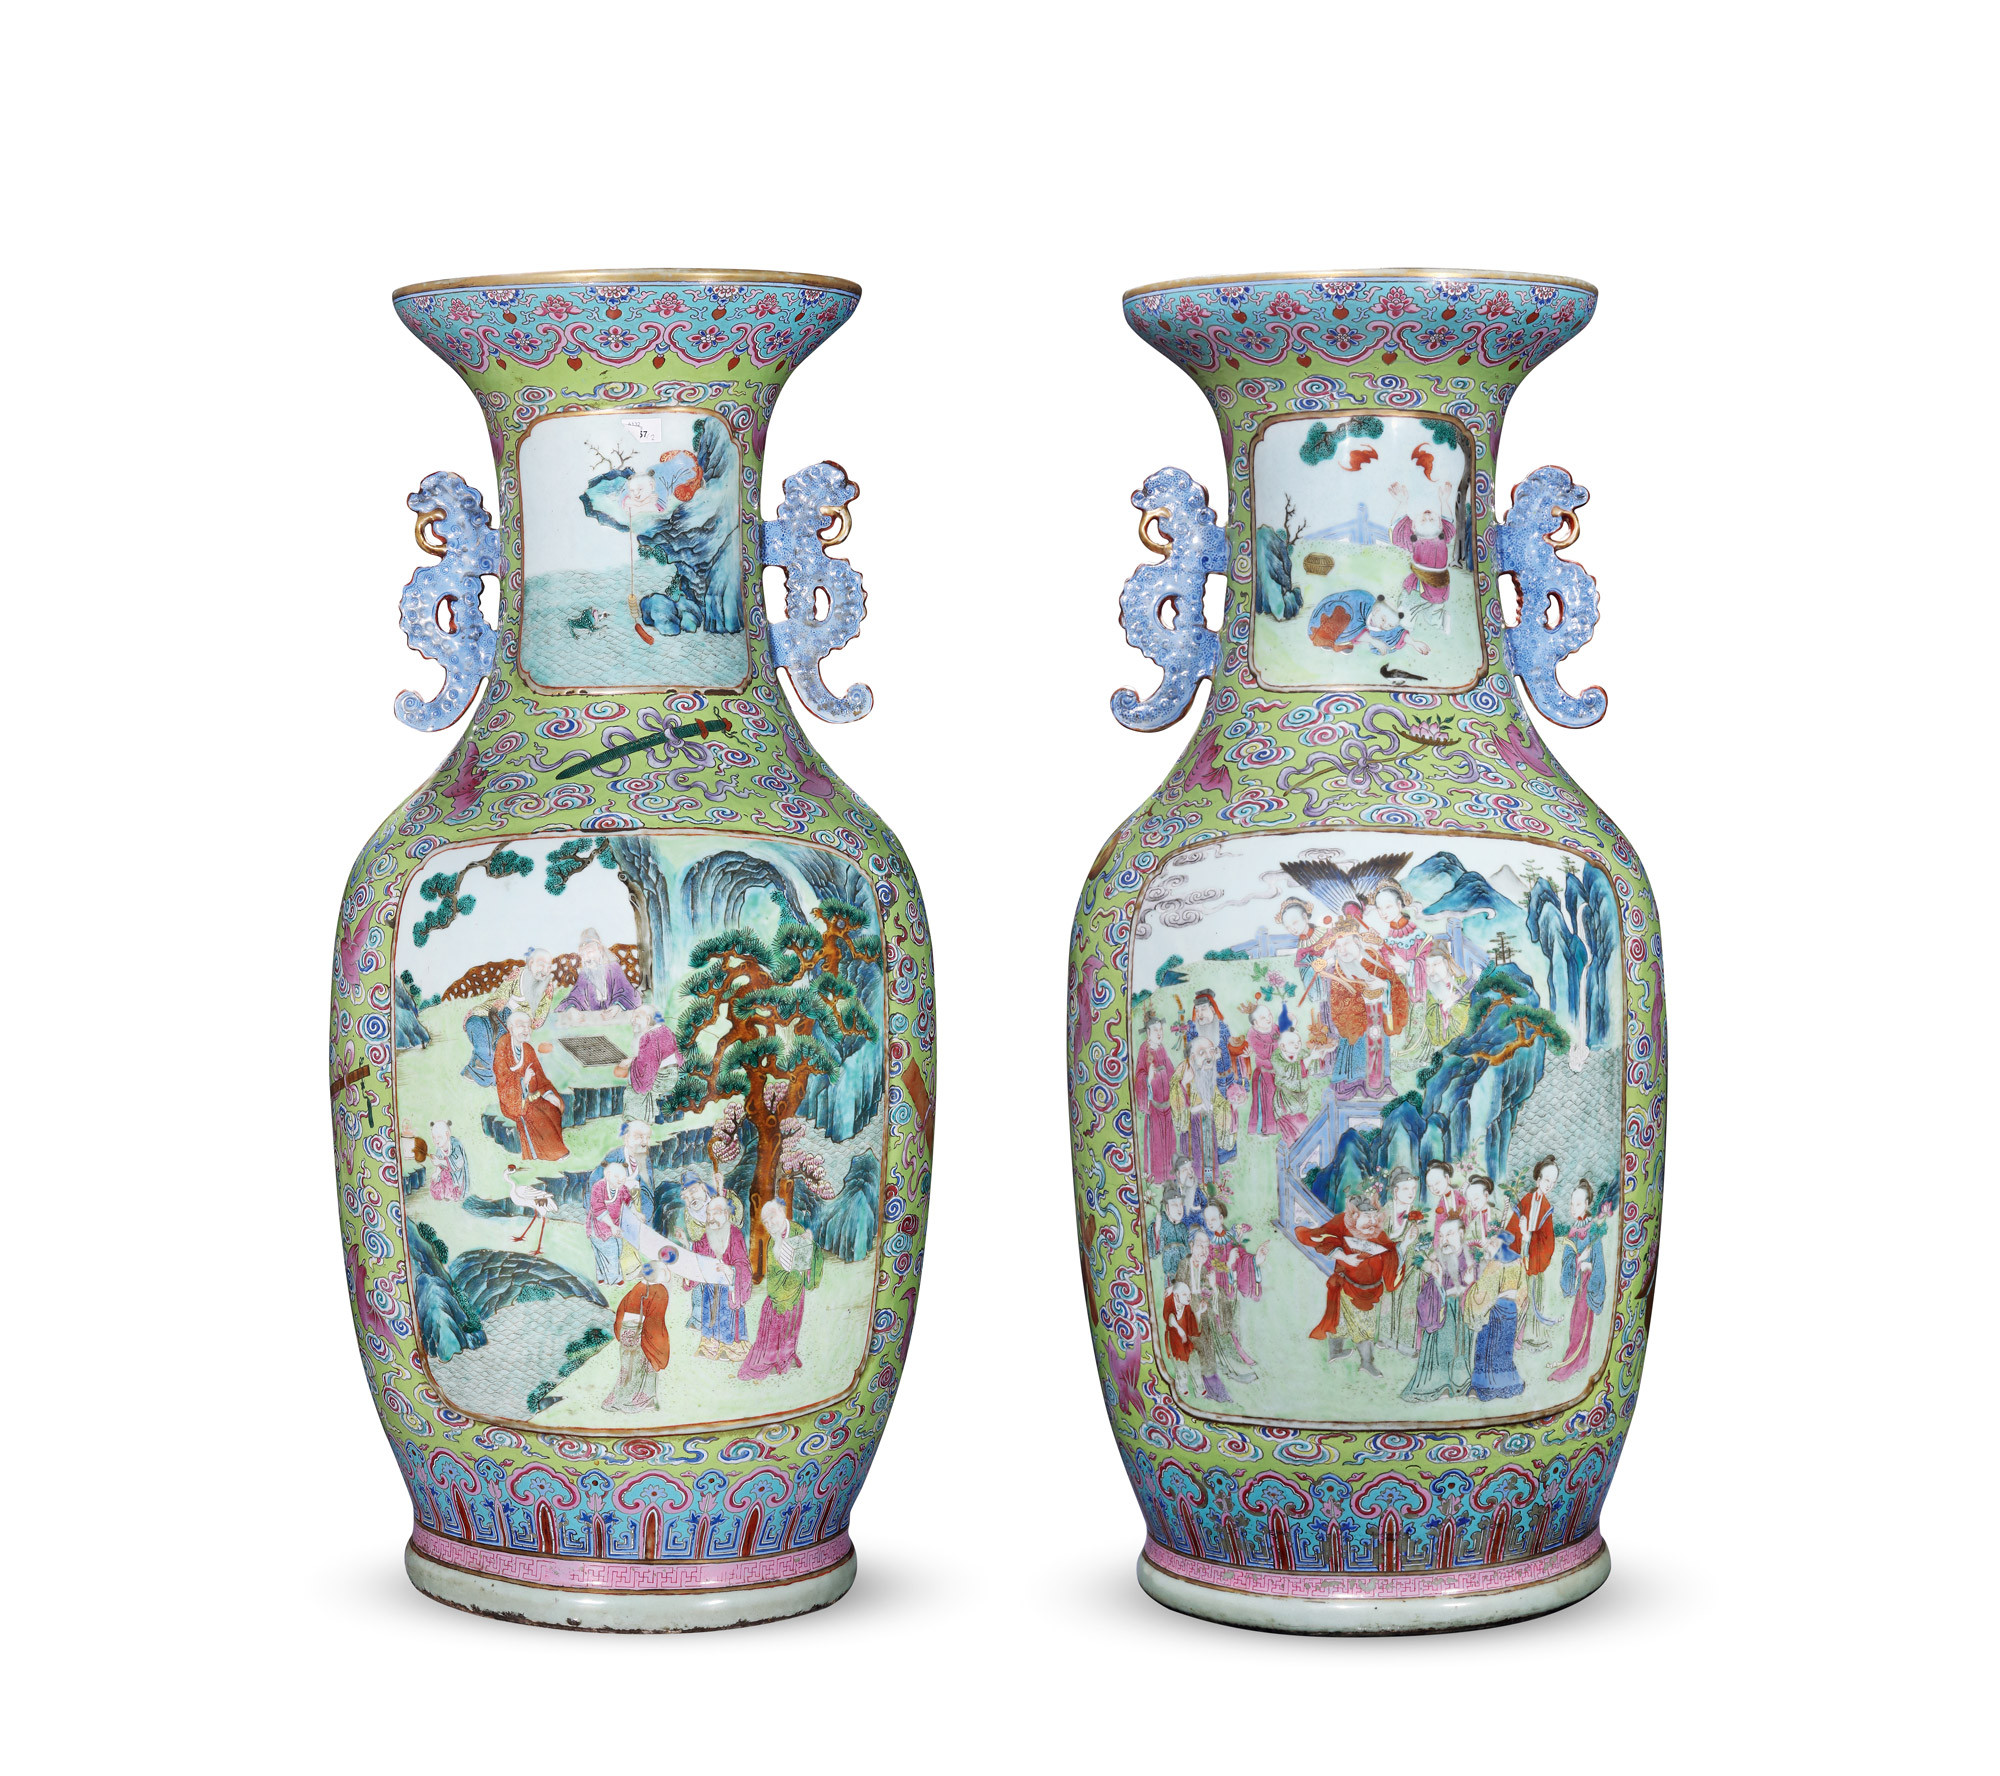 A LARGE PAIR OF FAMILLE-ROSE ‘LONGEVITY’ VASES